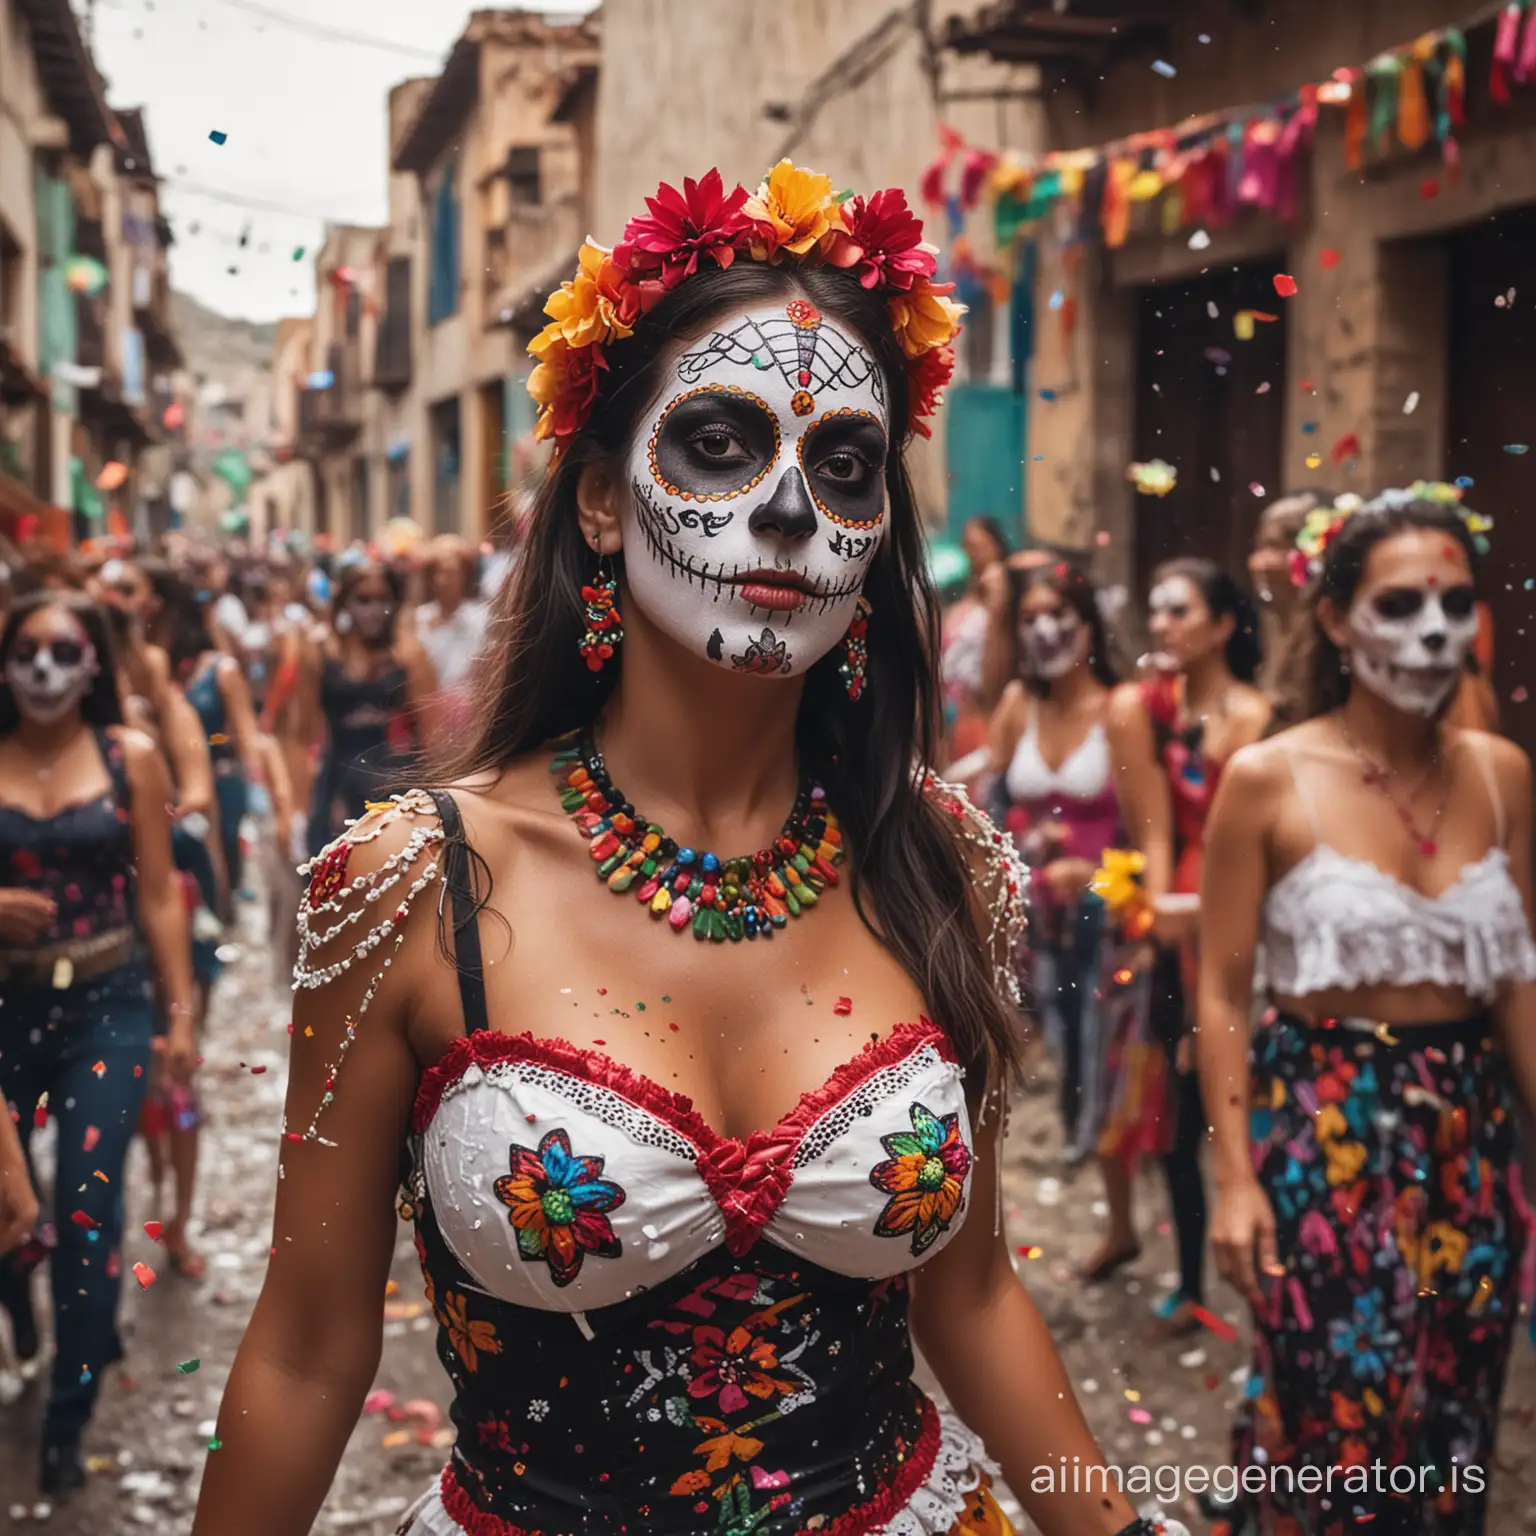 the day of the dead with a batucada in an alley of a village in Mexico, dynamic and very colorful photo, festive atmosphere, very sexy women and music, insane cleavage, musicians, batucada, lots of people, very dynamic professional quality photo, batucada, people dancing, confetti, bright photo